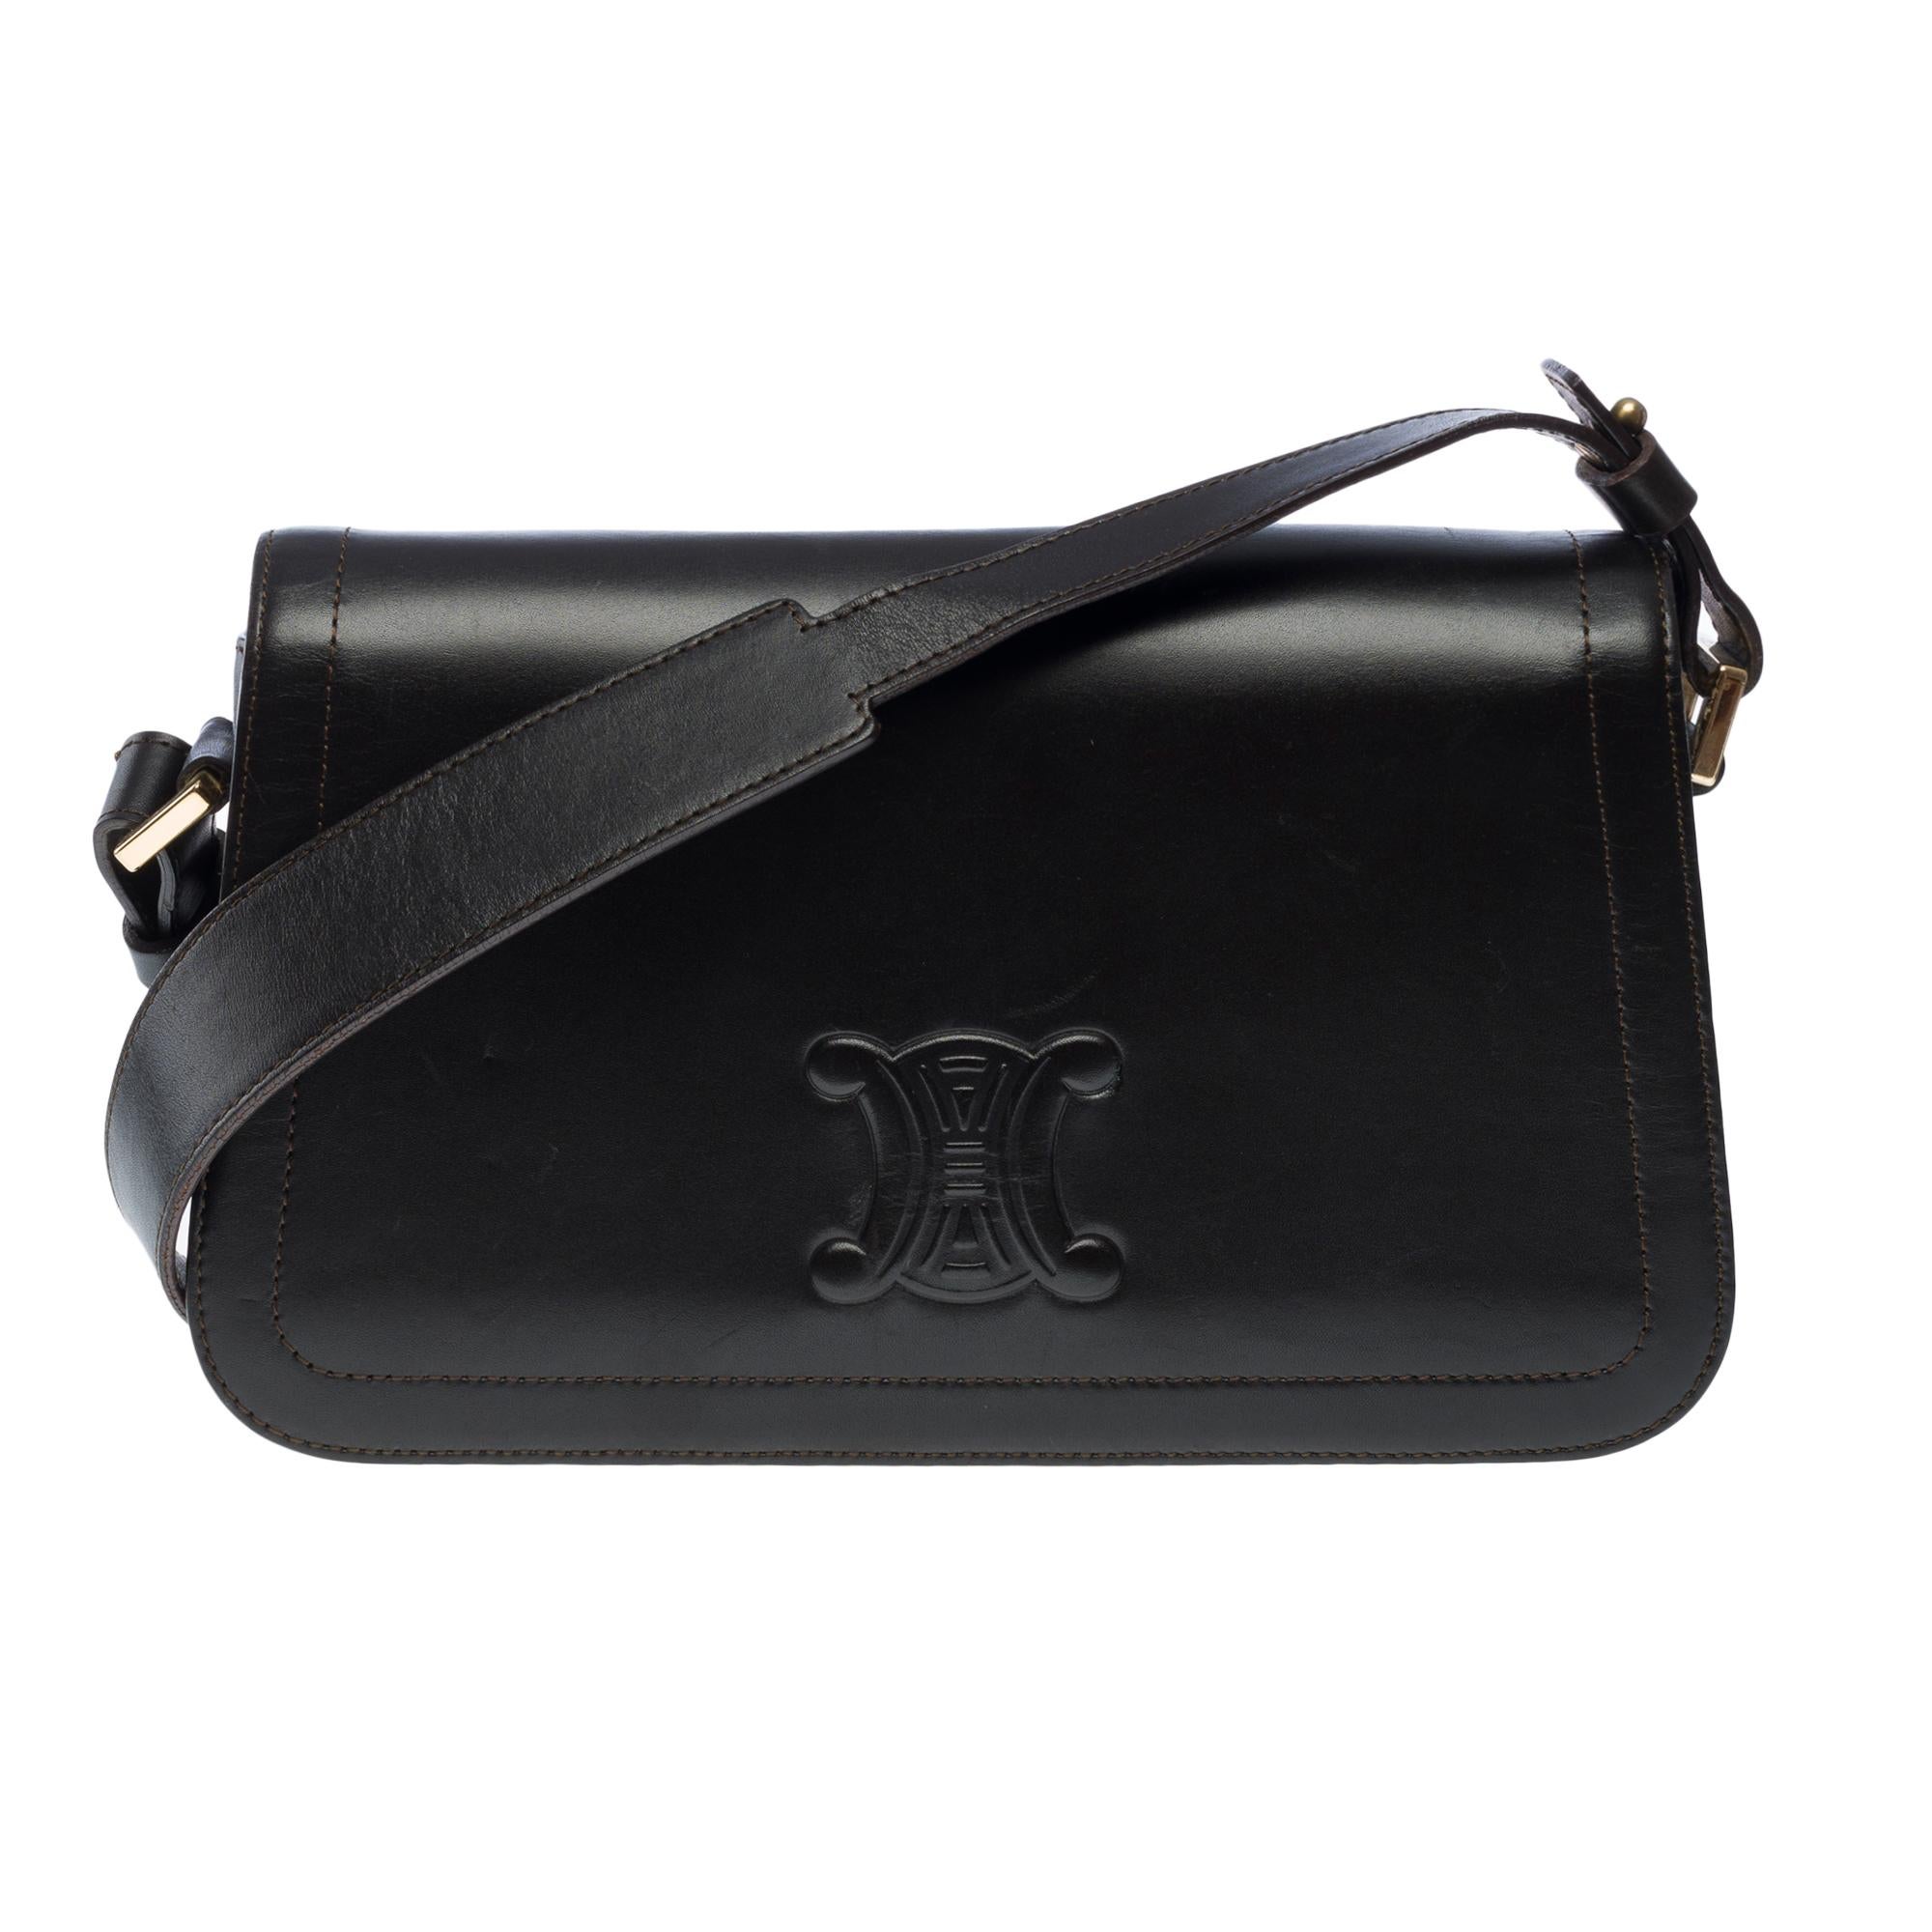 Gorgeous​ ​Celine​ ​Triomphe​ ​​shoulder​ ​flap​ ​bag​ ​in​ ​black​ ​leather,​ ​gold​ ​metal​ ​hardware,​ ​a​ ​black​ ​leather​ ​strap​ ​for​ ​a​ ​hand​ ​or​ ​shoulder​ ​carry

A​ ​flap​ ​closure​ ​by​ ​magnetic​ ​button​ ​in​ ​gold​